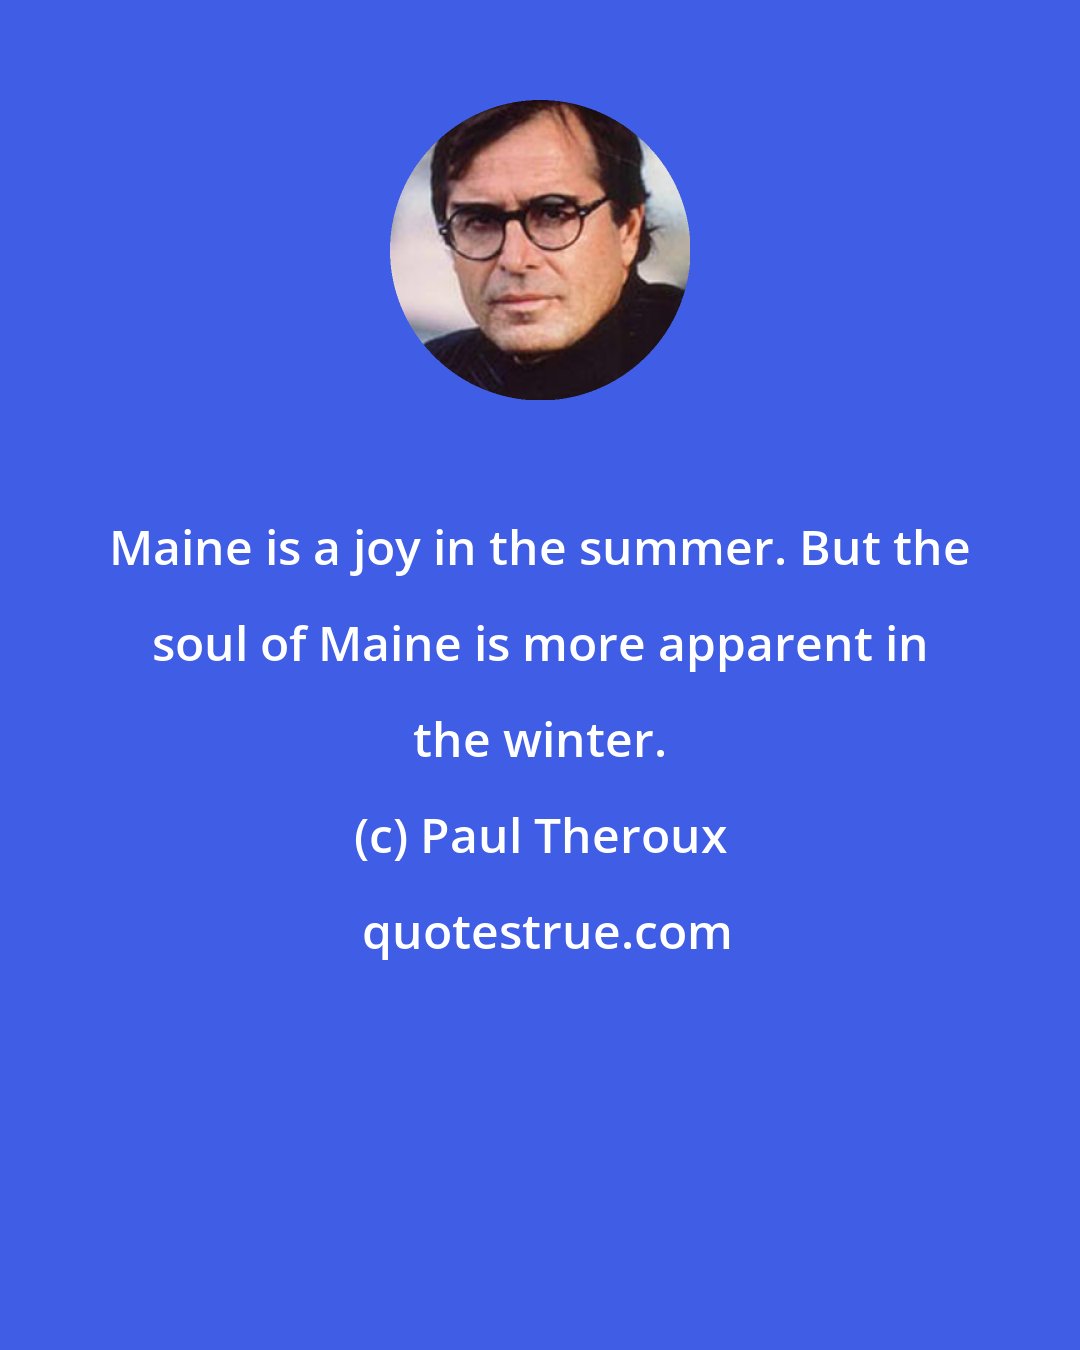 Paul Theroux: Maine is a joy in the summer. But the soul of Maine is more apparent in the winter.